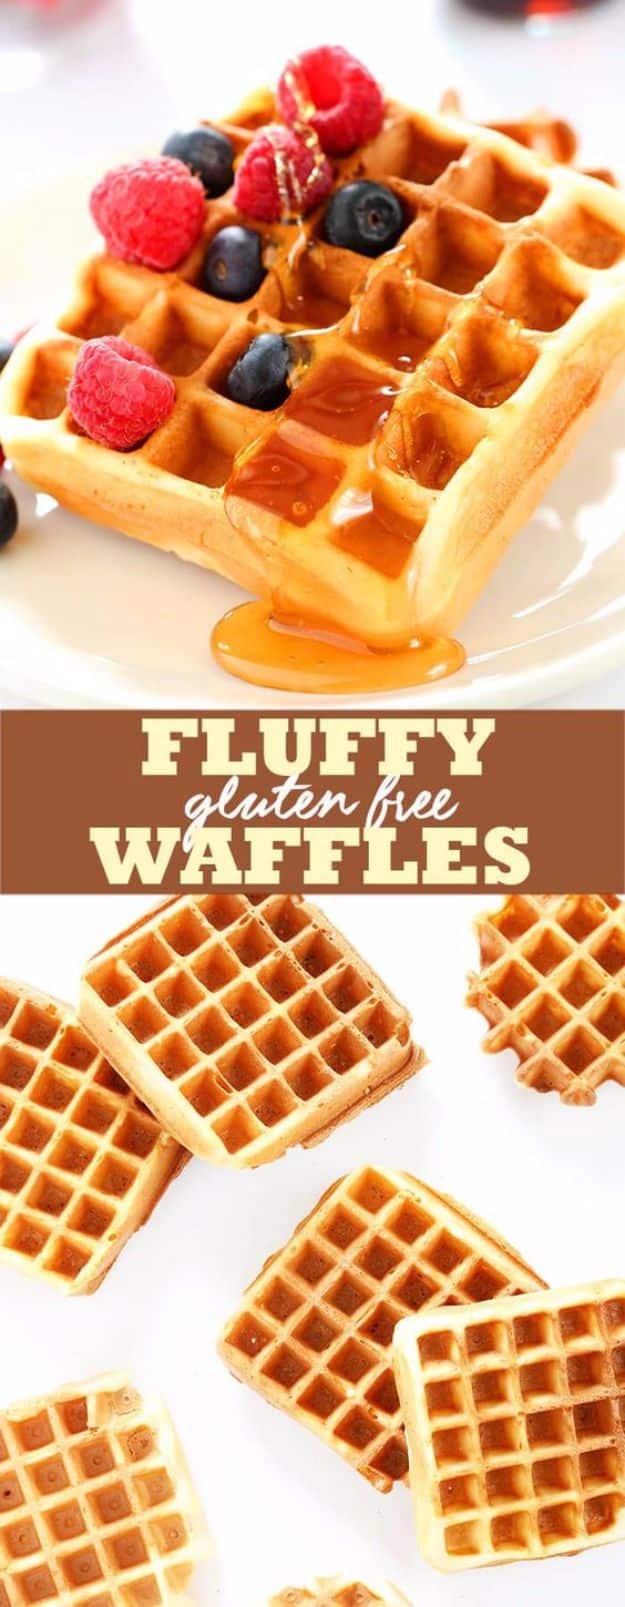 Gluten Free Recipes - Fluffy Gluten Free Waffles - Easy Vegetarian or Vegan Recipes For Dinner and For Dessert - How To Make Healthy Glutenfree Bread and Appetizers For Kids - Fun Crockpot Recipes For Breakfast While On A Budget http://diyjoy.com/gluten-free-recipes